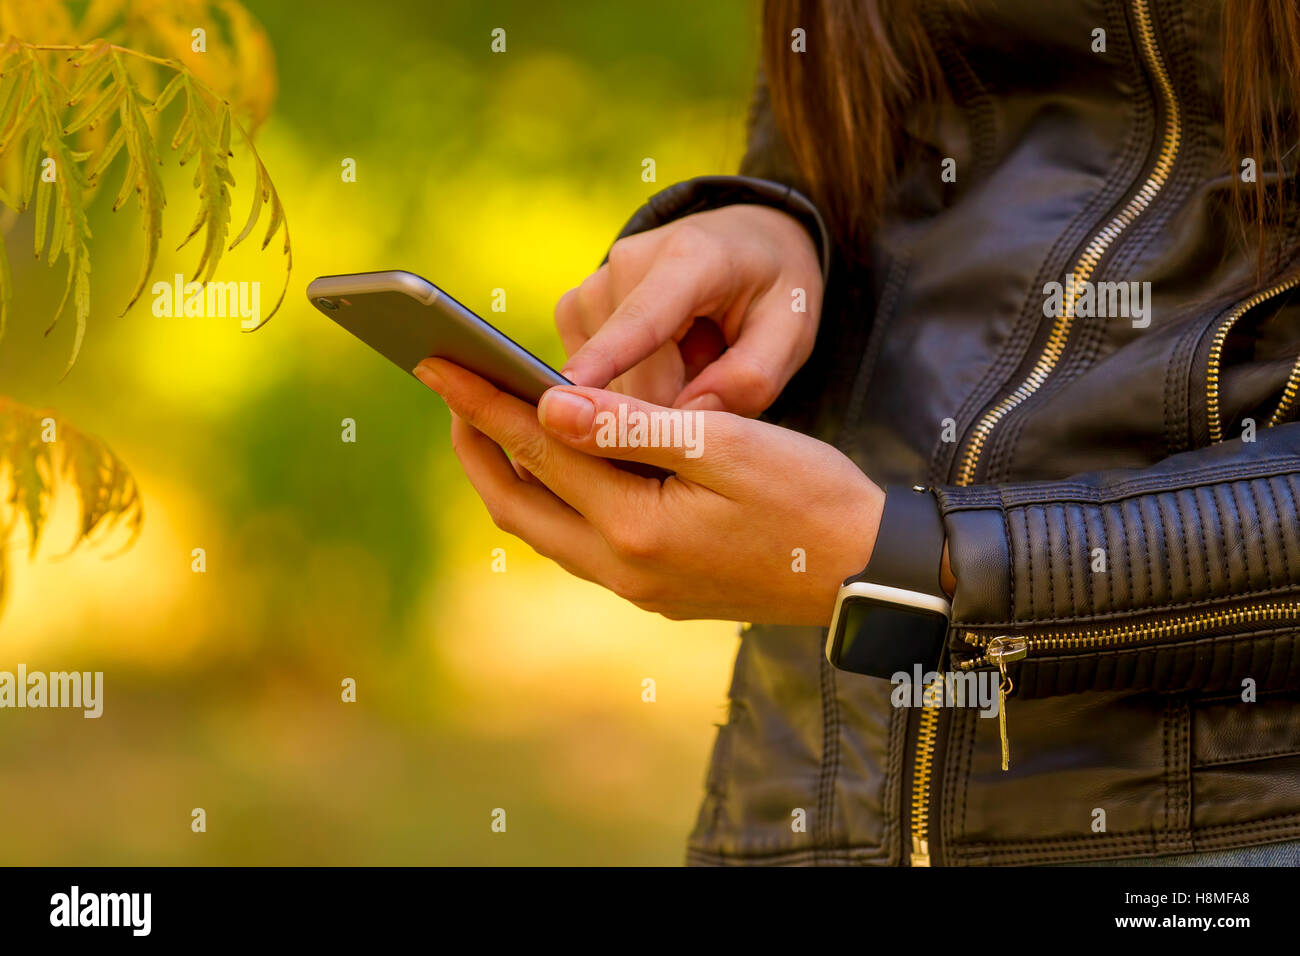 Young girl using smart phone in the park, wears smart watch in everyday lifestyle. Focus on smart phone! Stock Photo